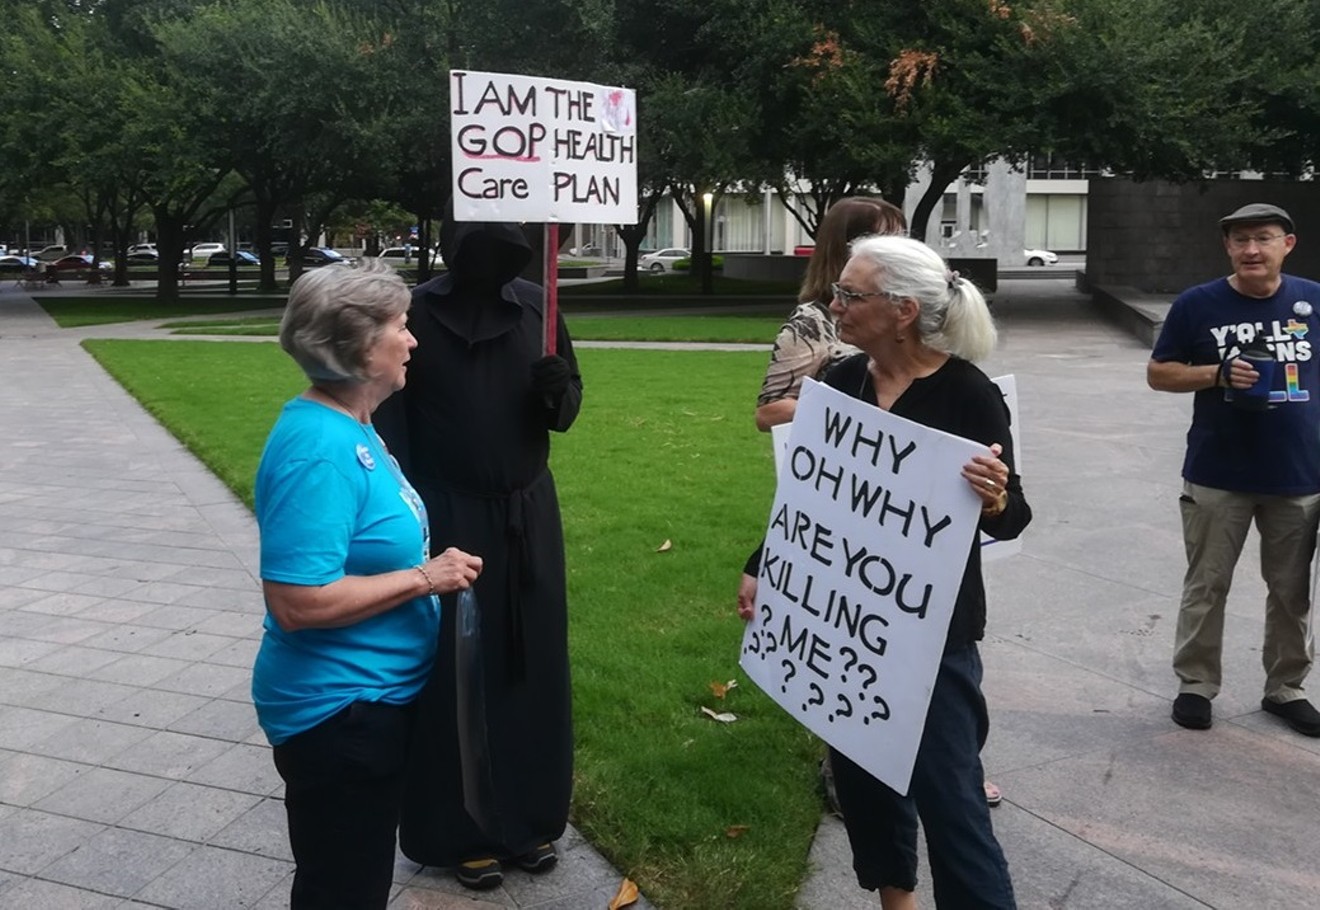 Protesters supporting the Affordable Care Act in Fort Worth earlier this year.